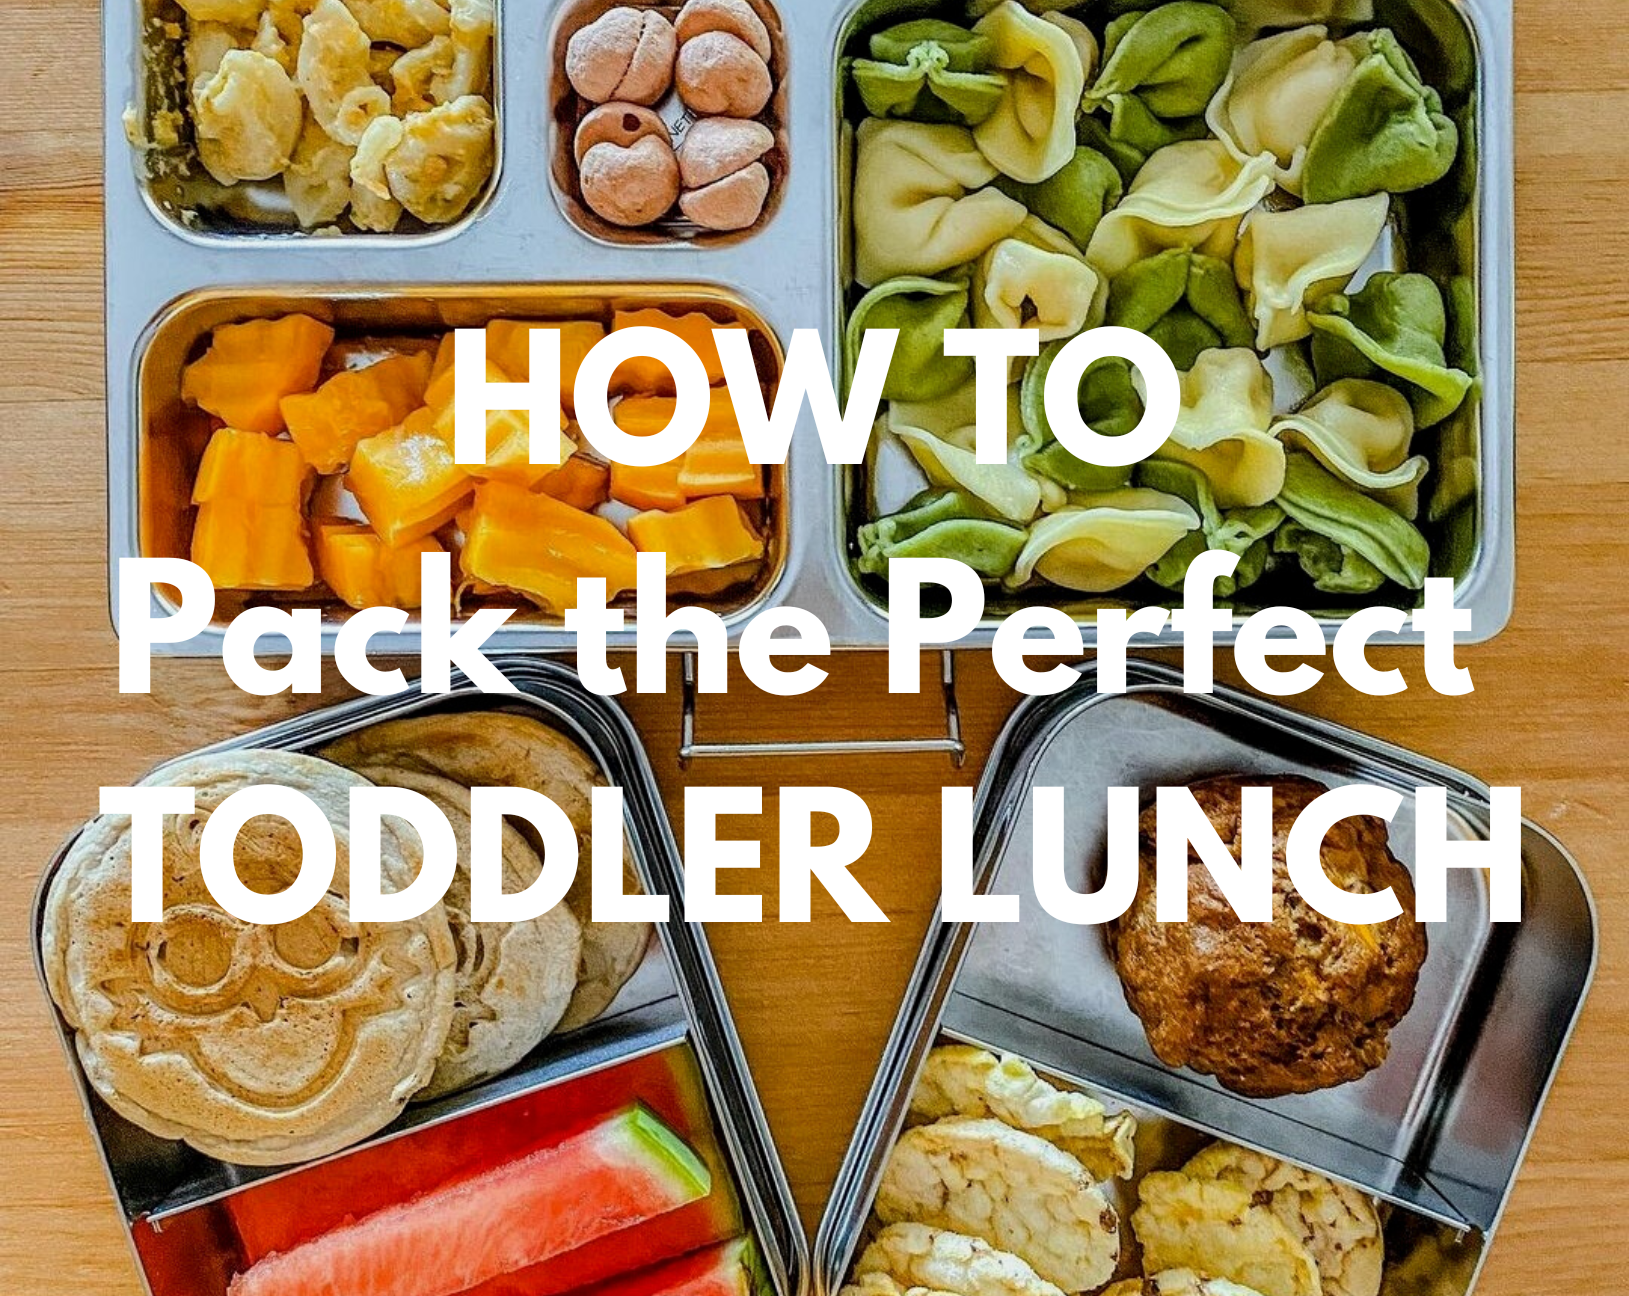 healthy toddler lunch ideas for daycare